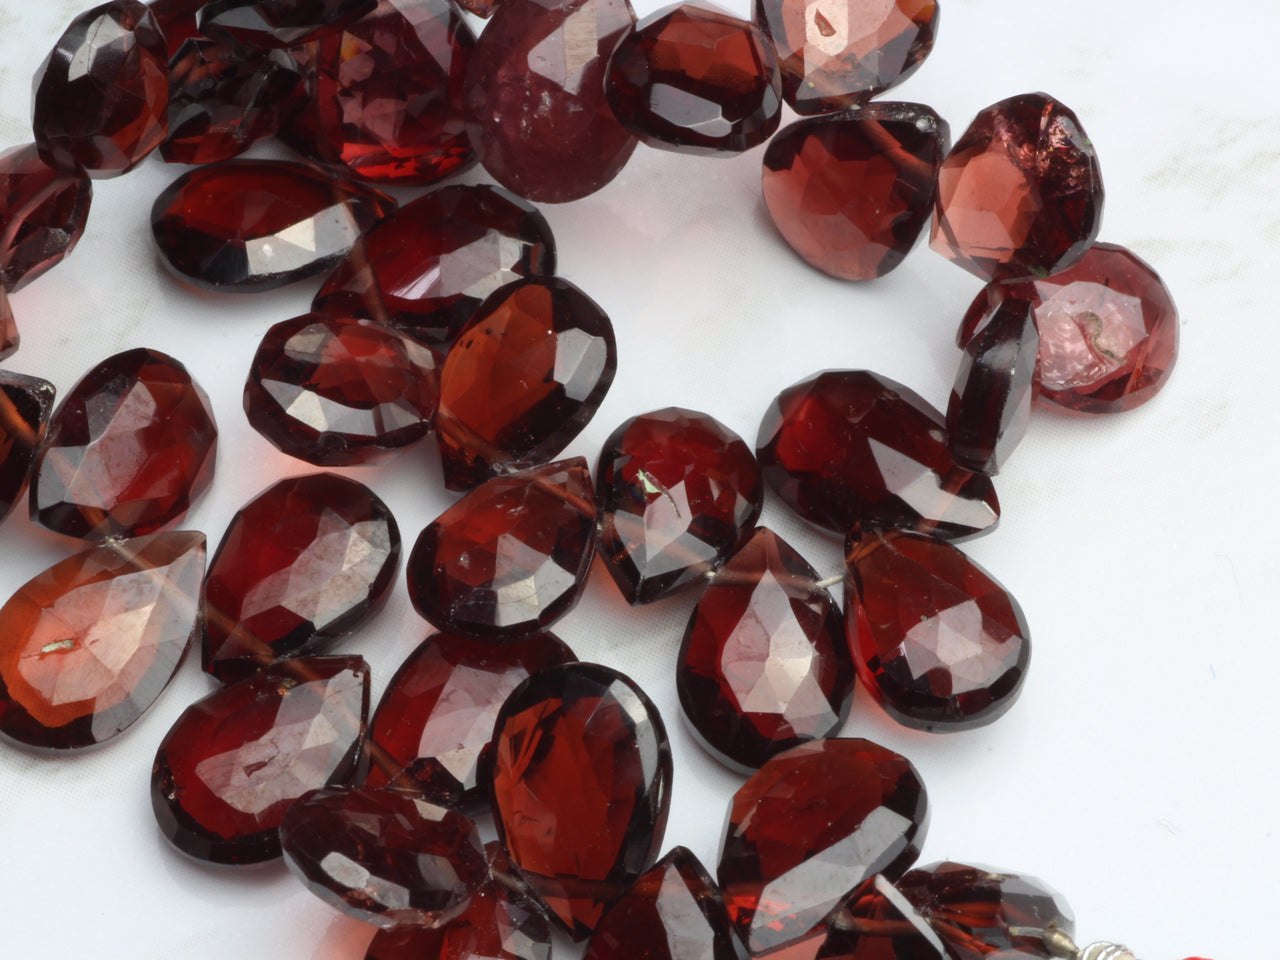 Red Garnet 9x7mm Faceted Pear Shaped Briolettes